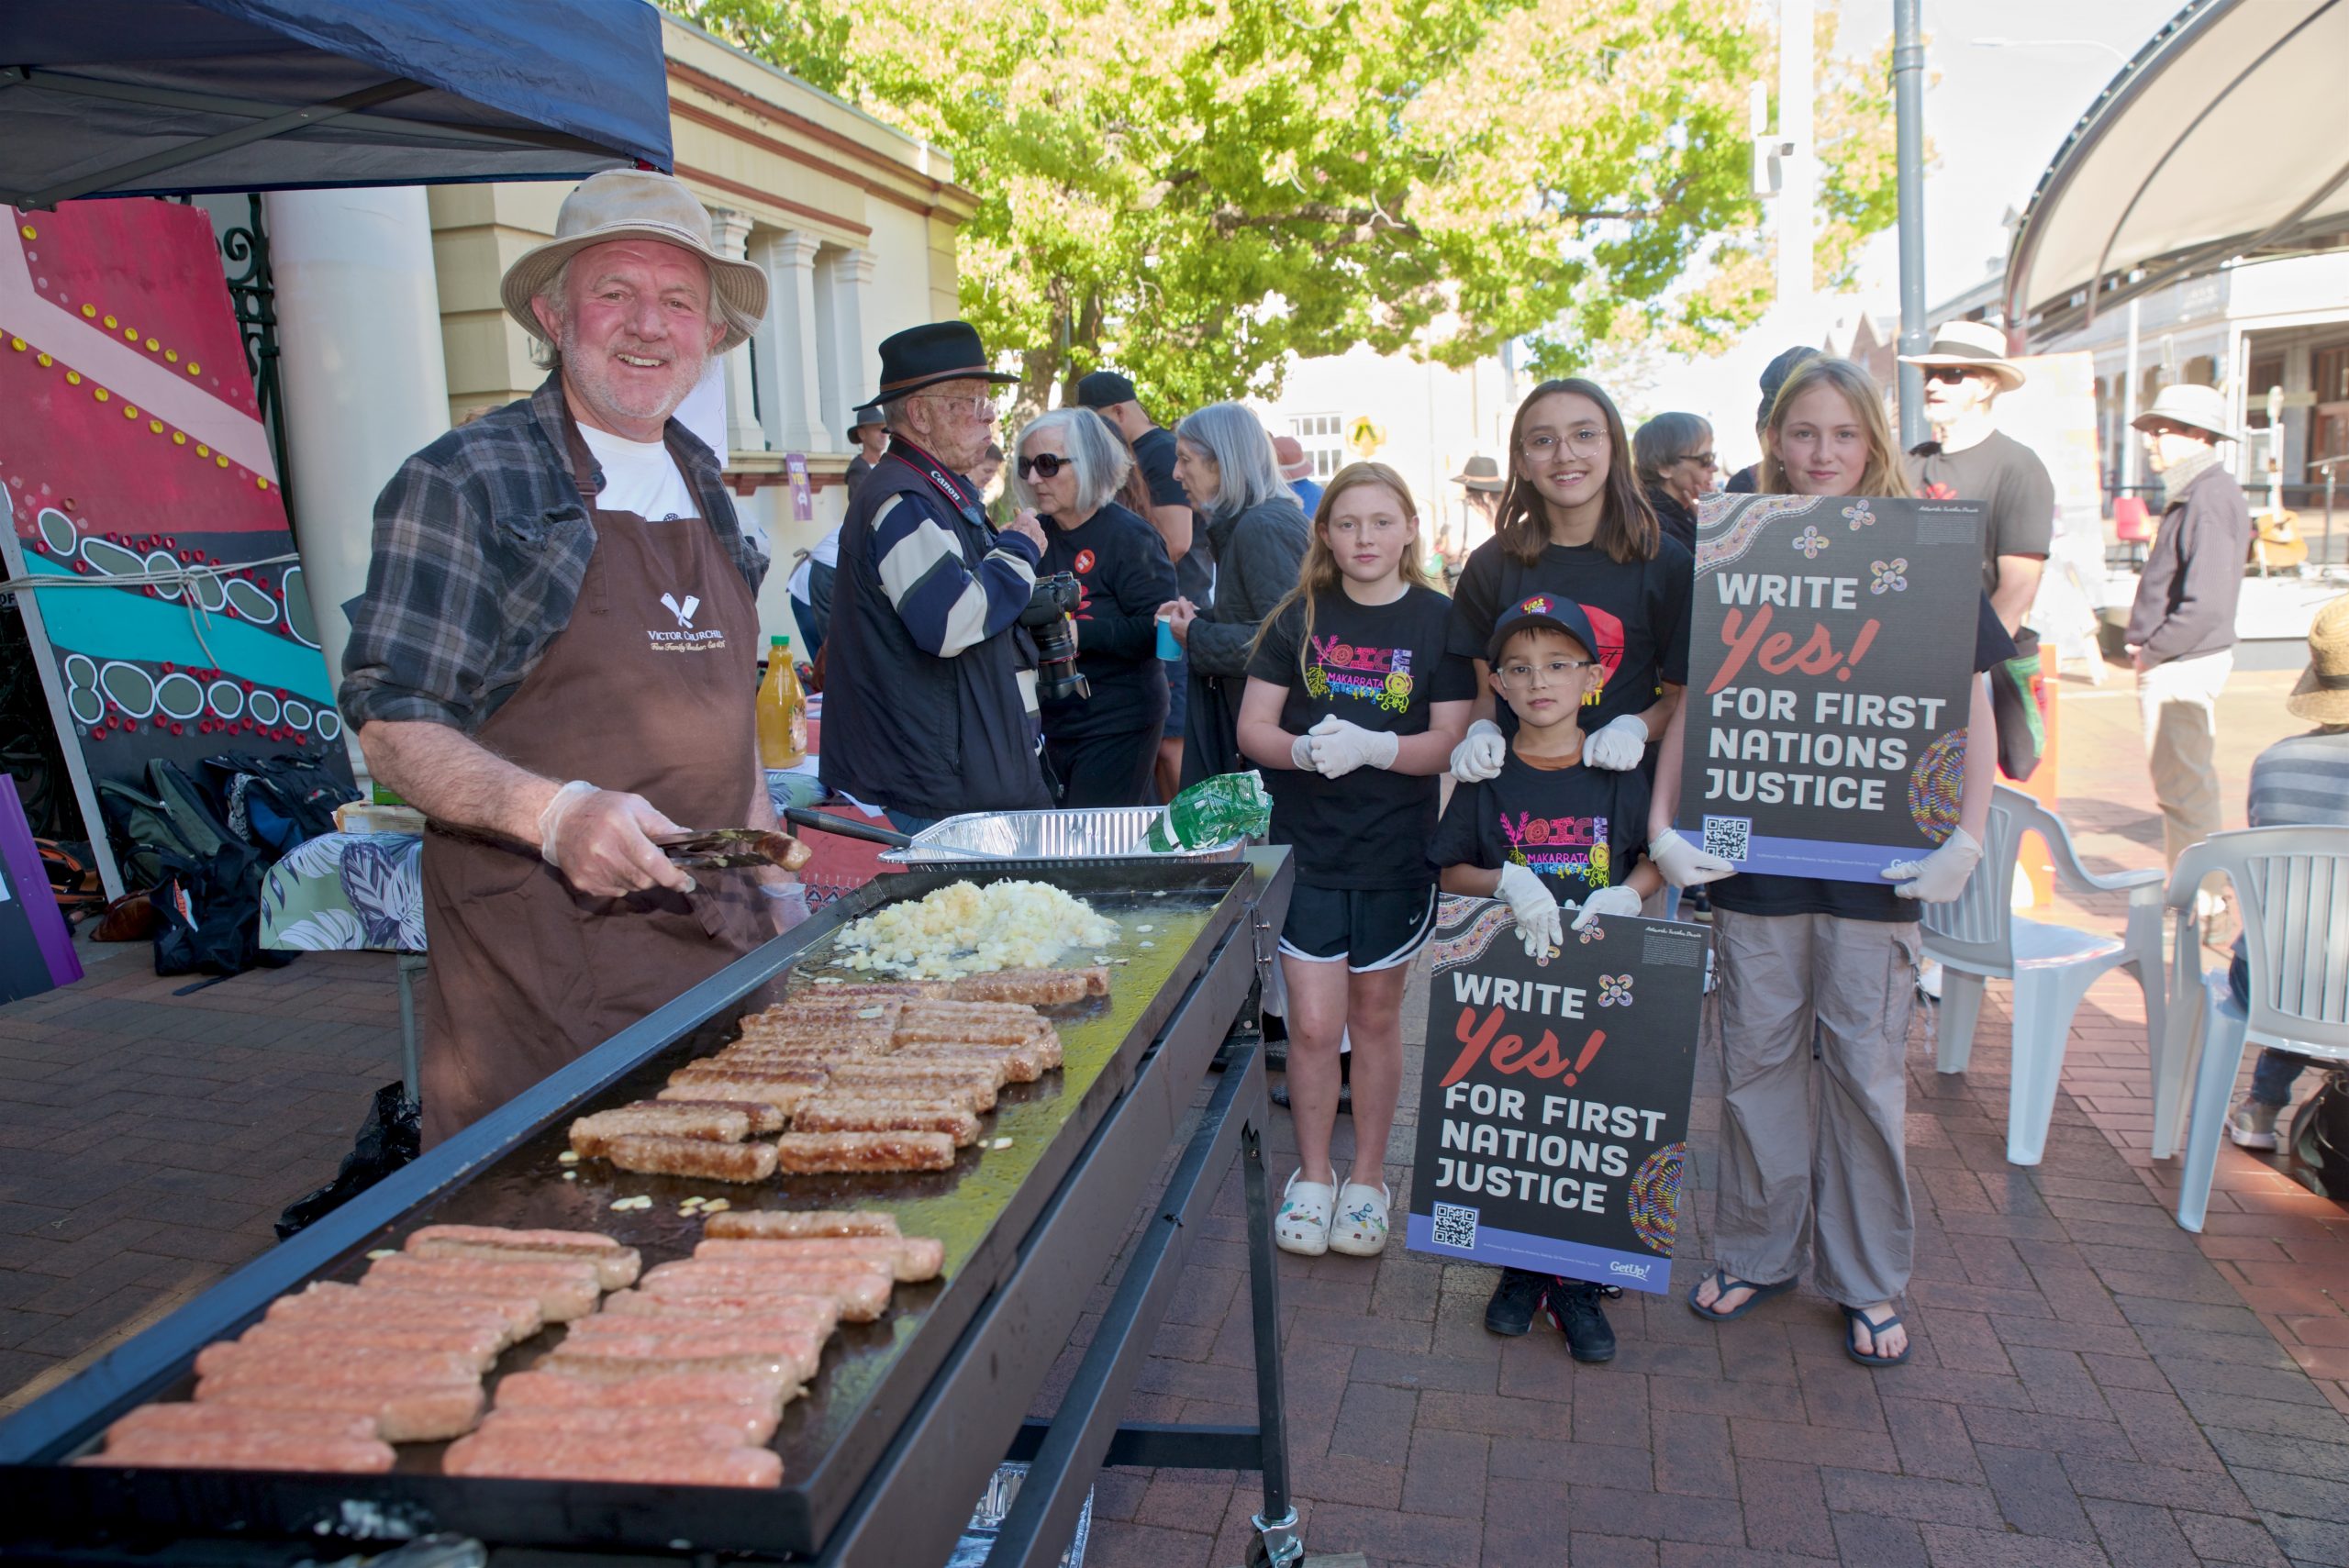 Sausage sizzle at Yes 2023 event ©DaveRobinson2023